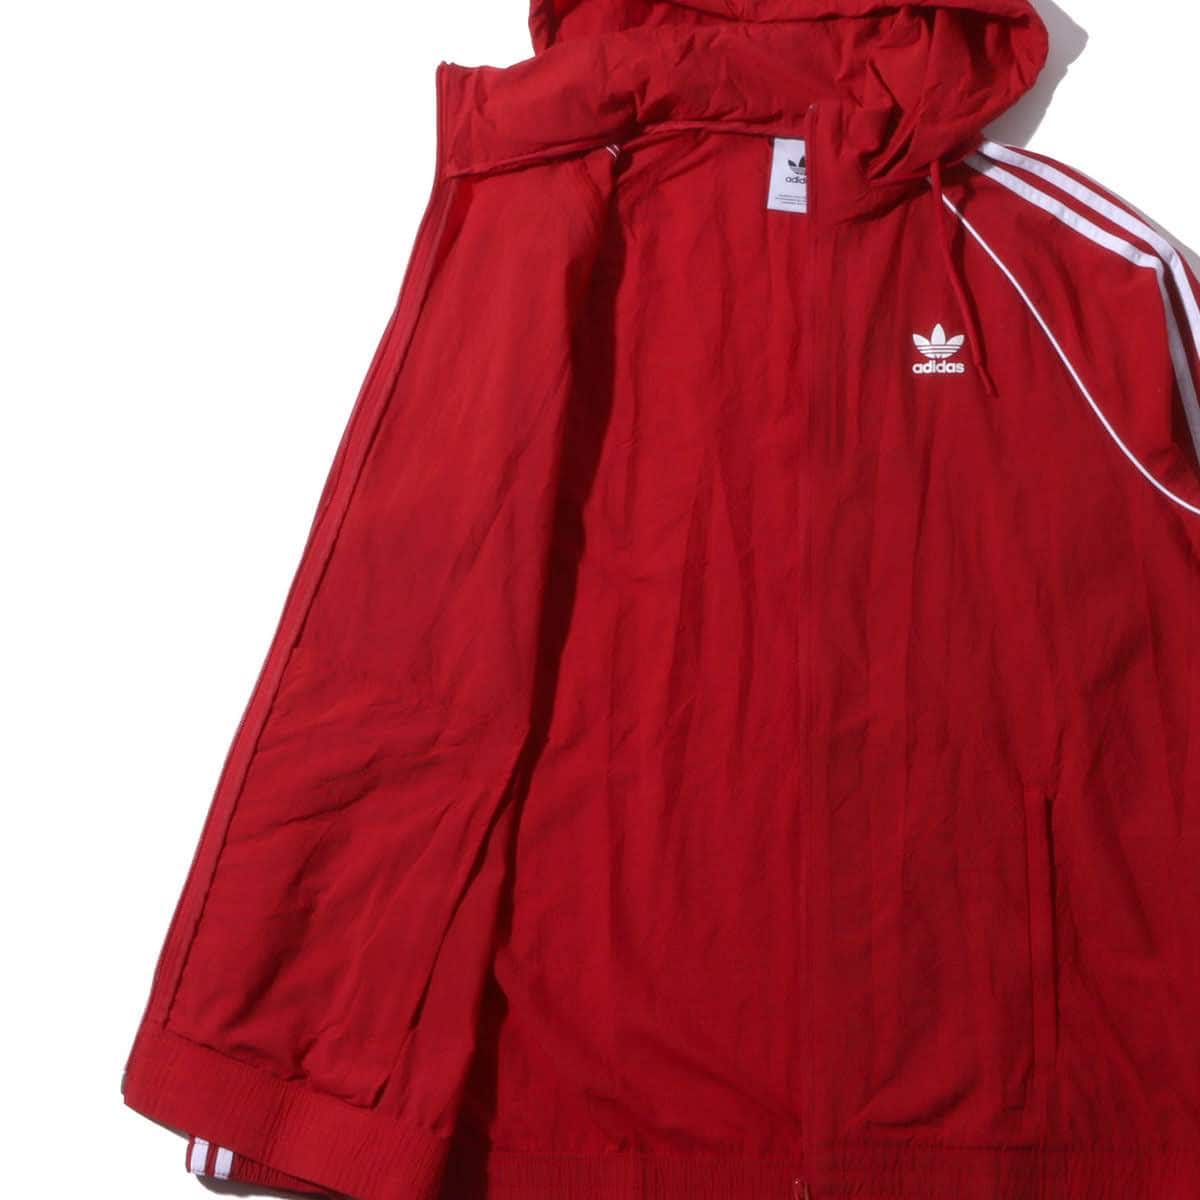 adidas sst power red